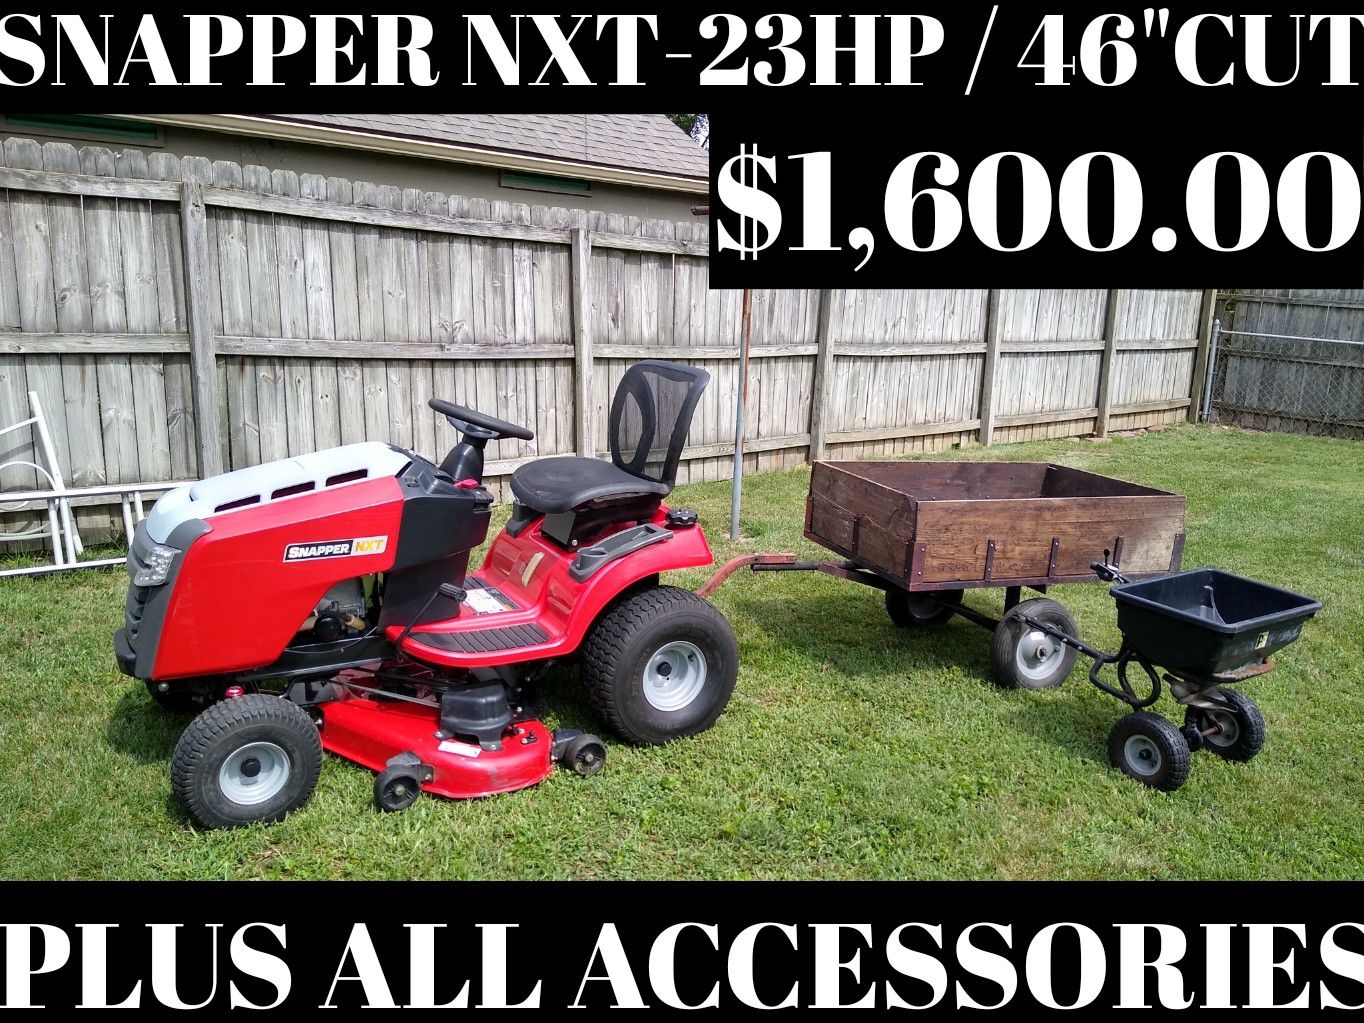 SNAPPER NXT RIDING TRACTOR / LAWN MOWER / 23HP-46" CUT / PLUS WAGON & SPREADER